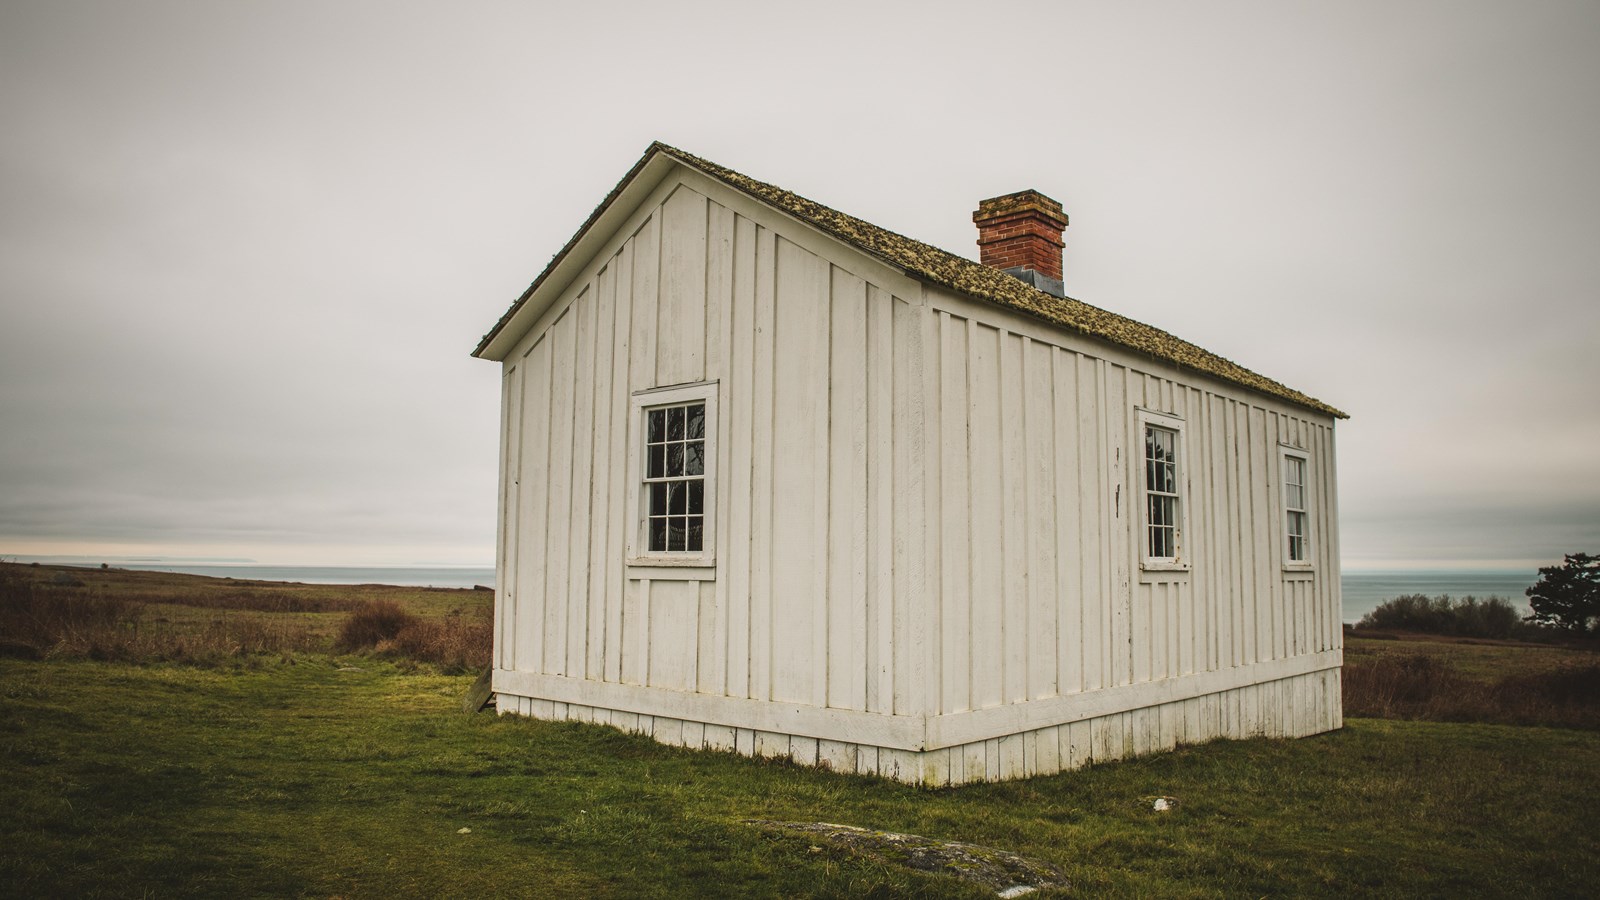 Photograph of a white building made of wood